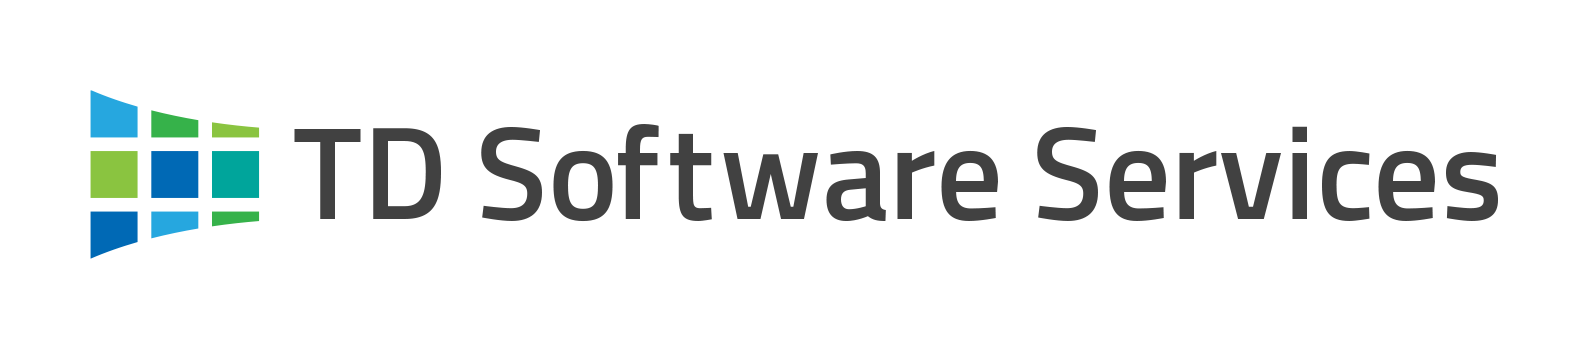 TD Software Services